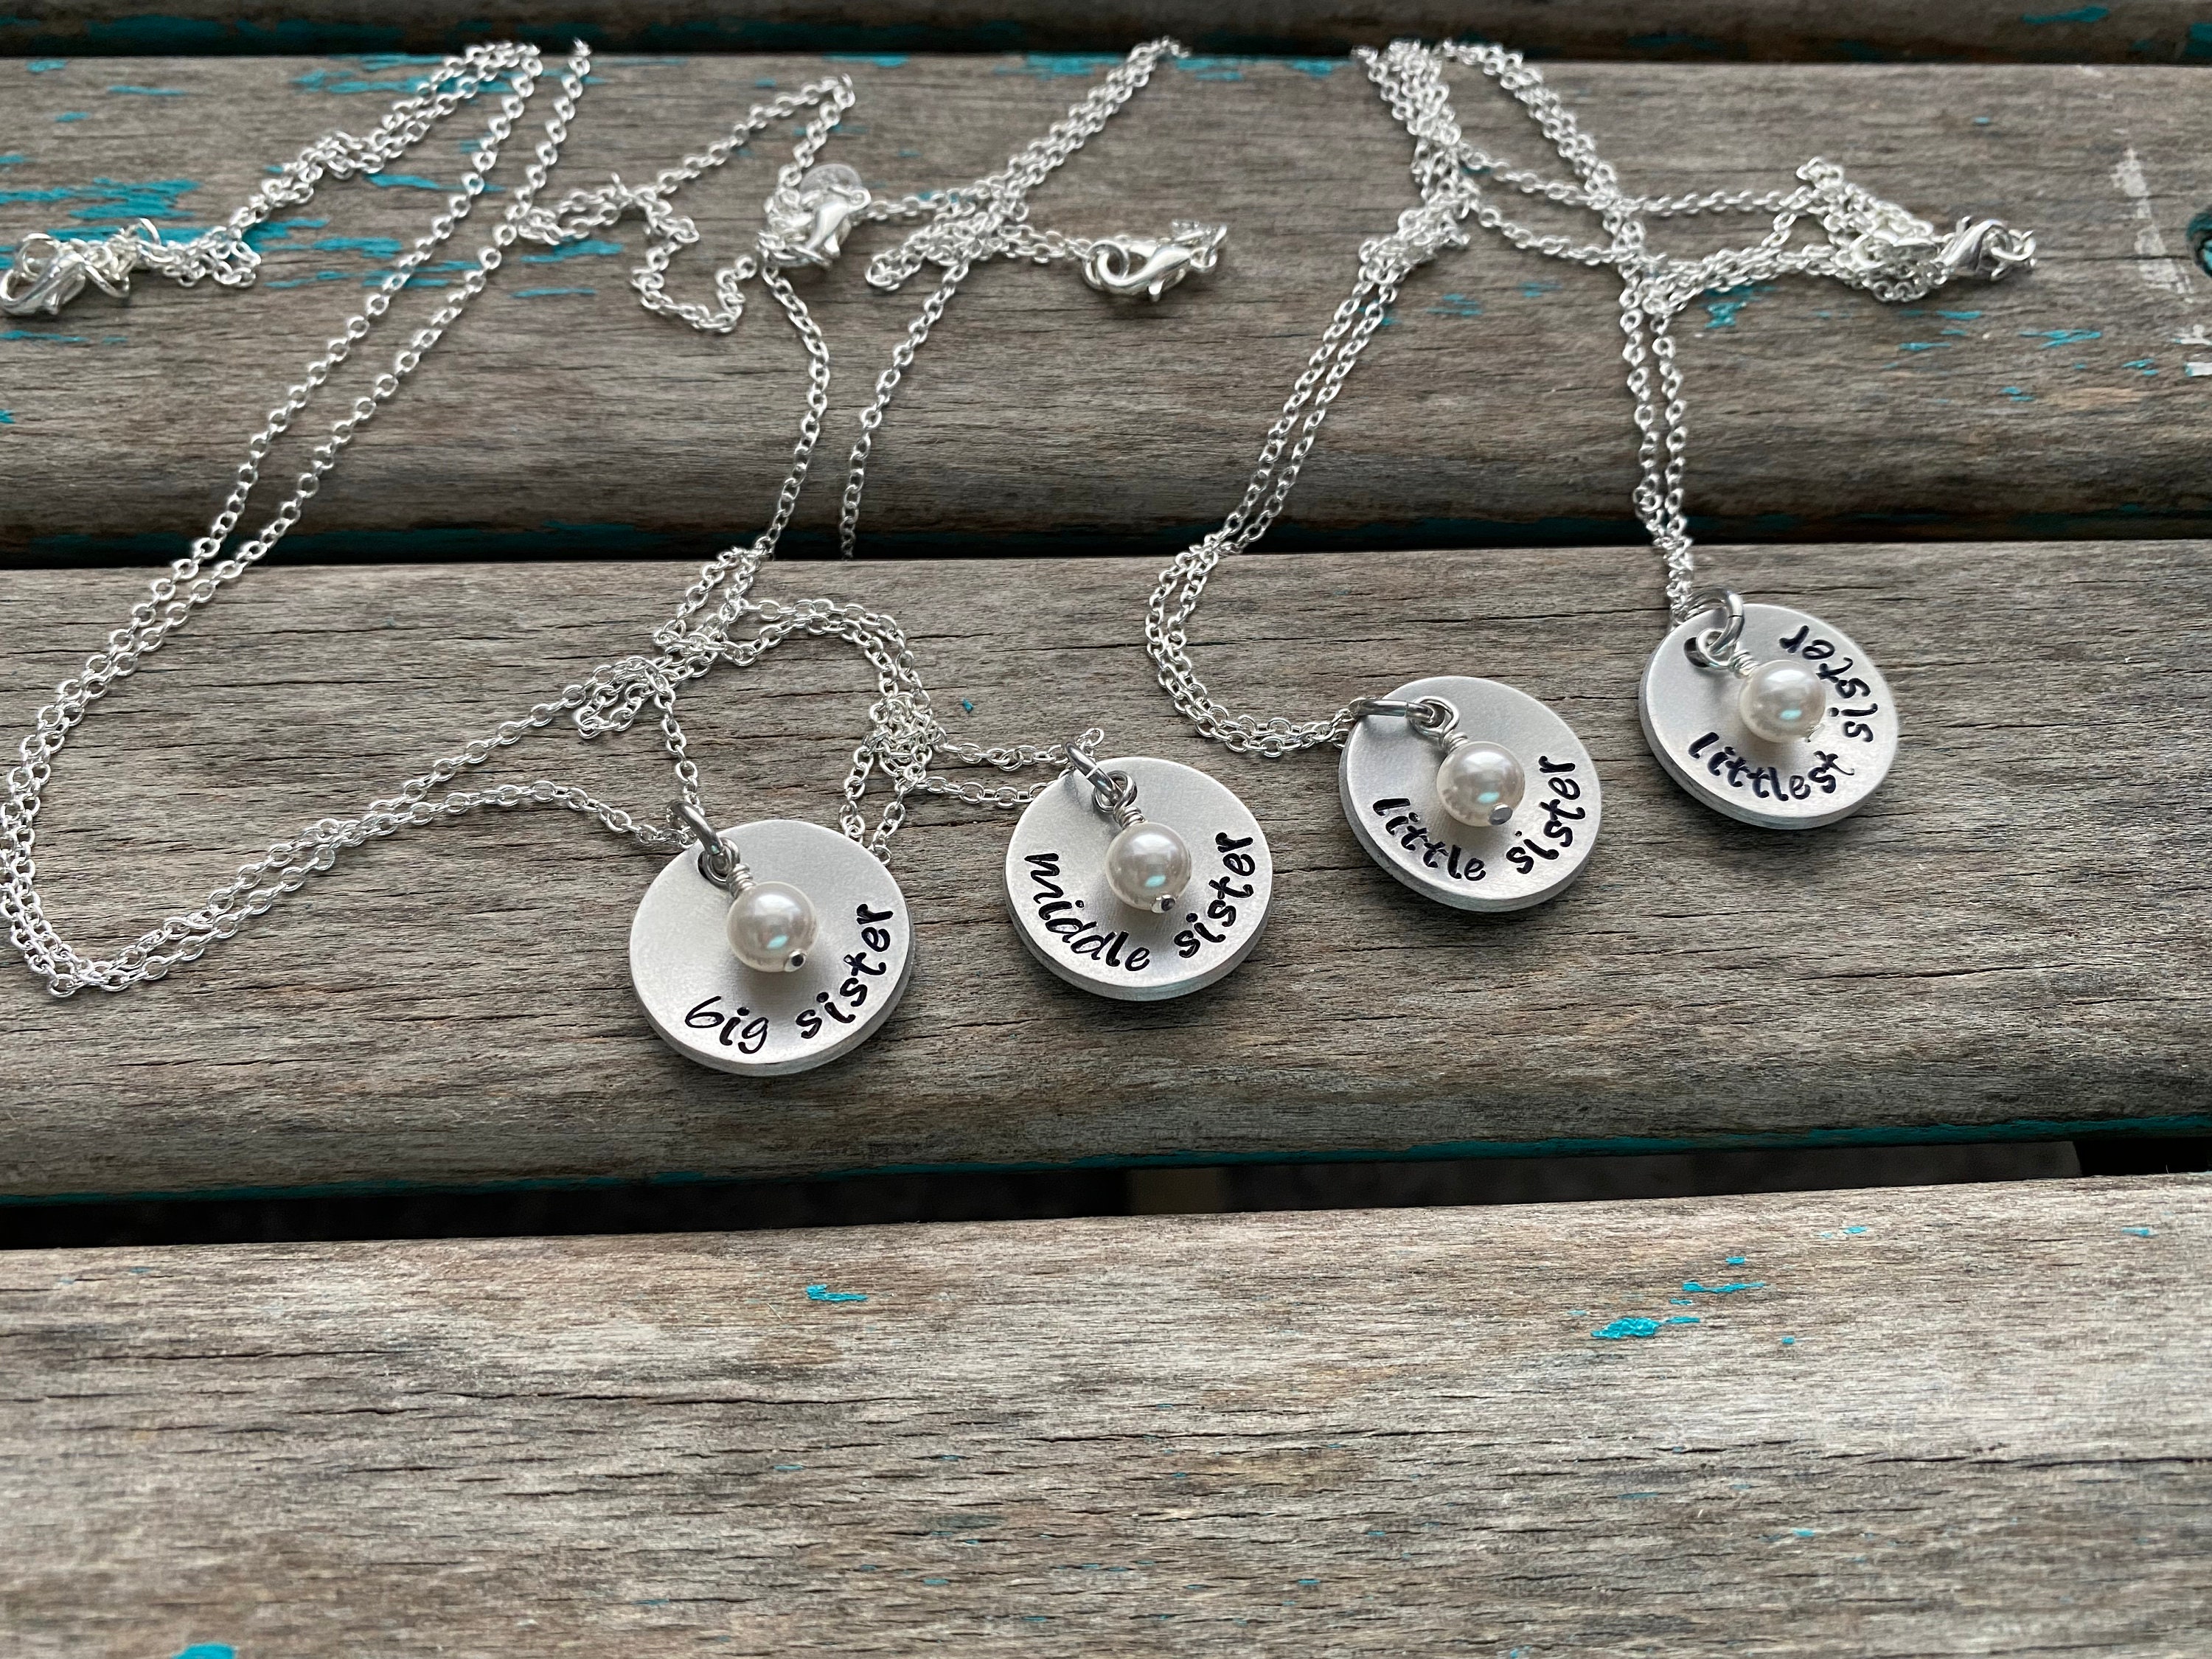 Sister Necklaces Set Charm Big Sister And Little Sisters Pendant With  Matching Half Heart Lettering Perfect Friendship Gift From Yanghuaxiao,  $10.55 | DHgate.Com